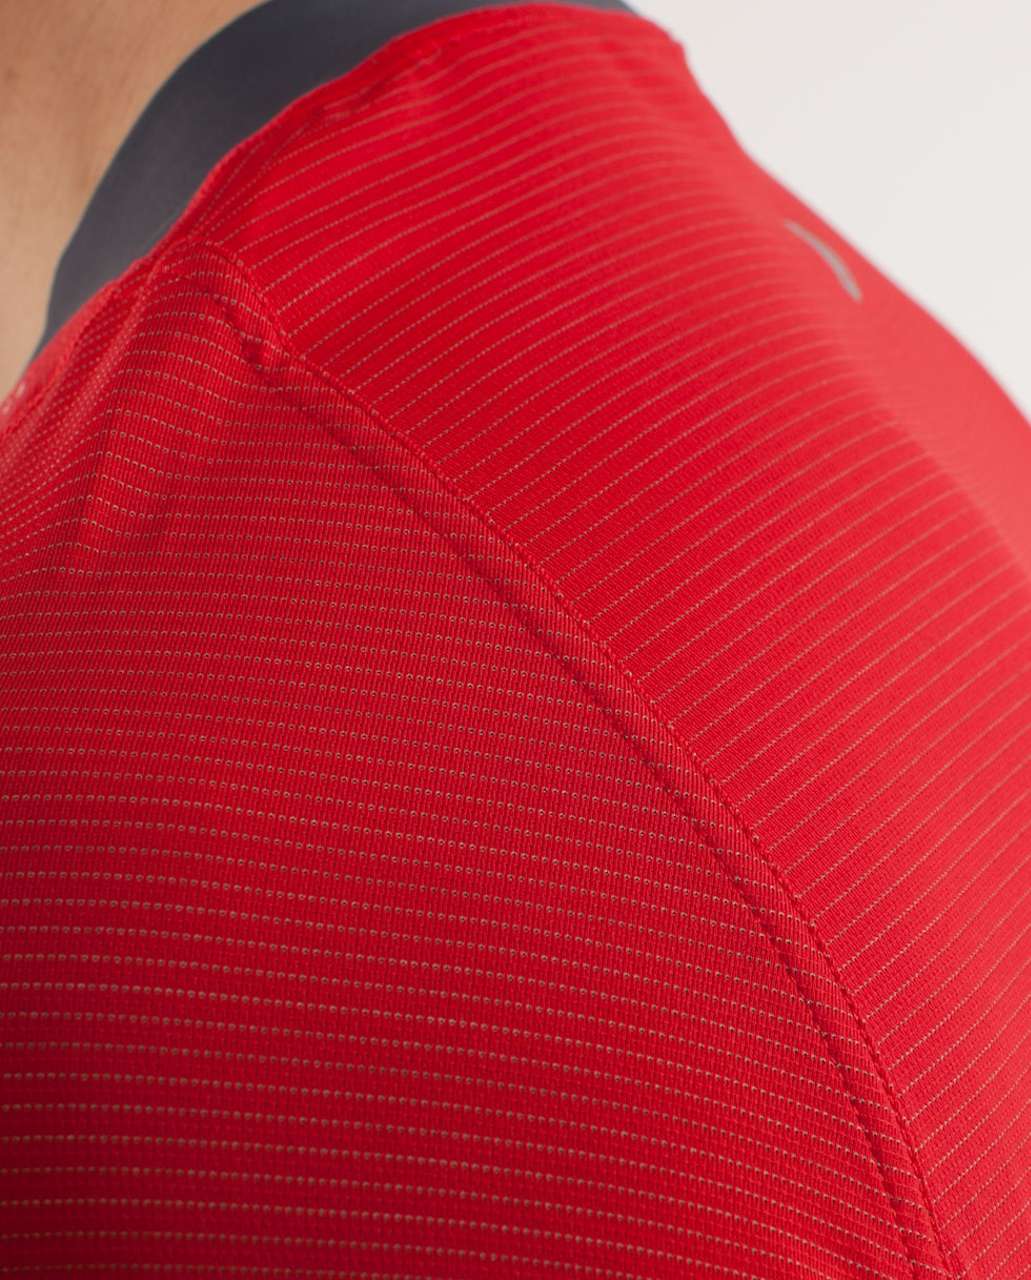 Lululemon Bolt Tech Short Sleeve - Chili / Invisible Branches